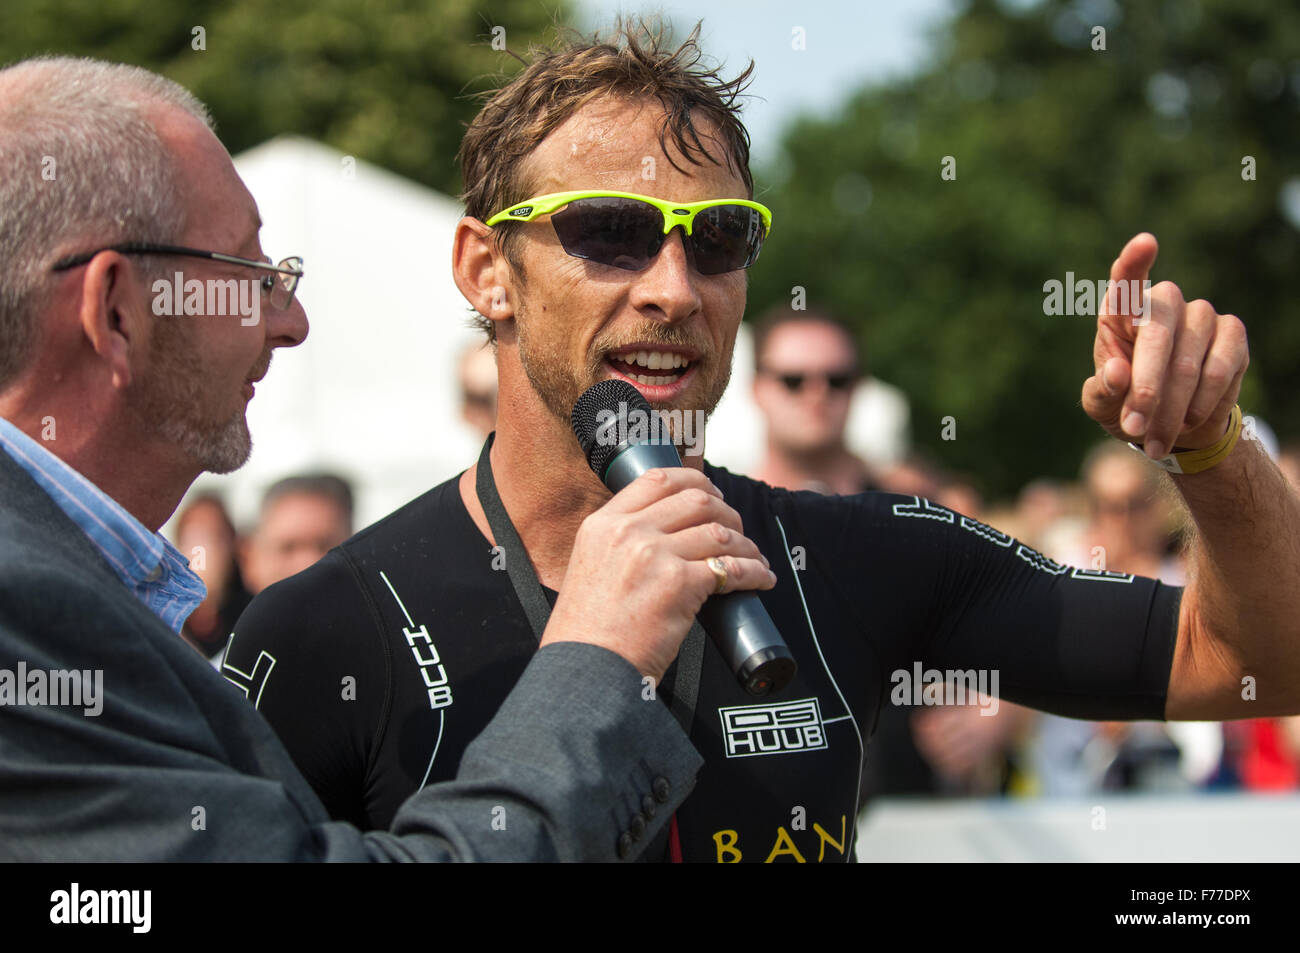 Post race interview by Andy Potter, of BBC Radio Derby, with Jenson Button at the Jenson Button Trust Triathlon 2015 Stock Photo